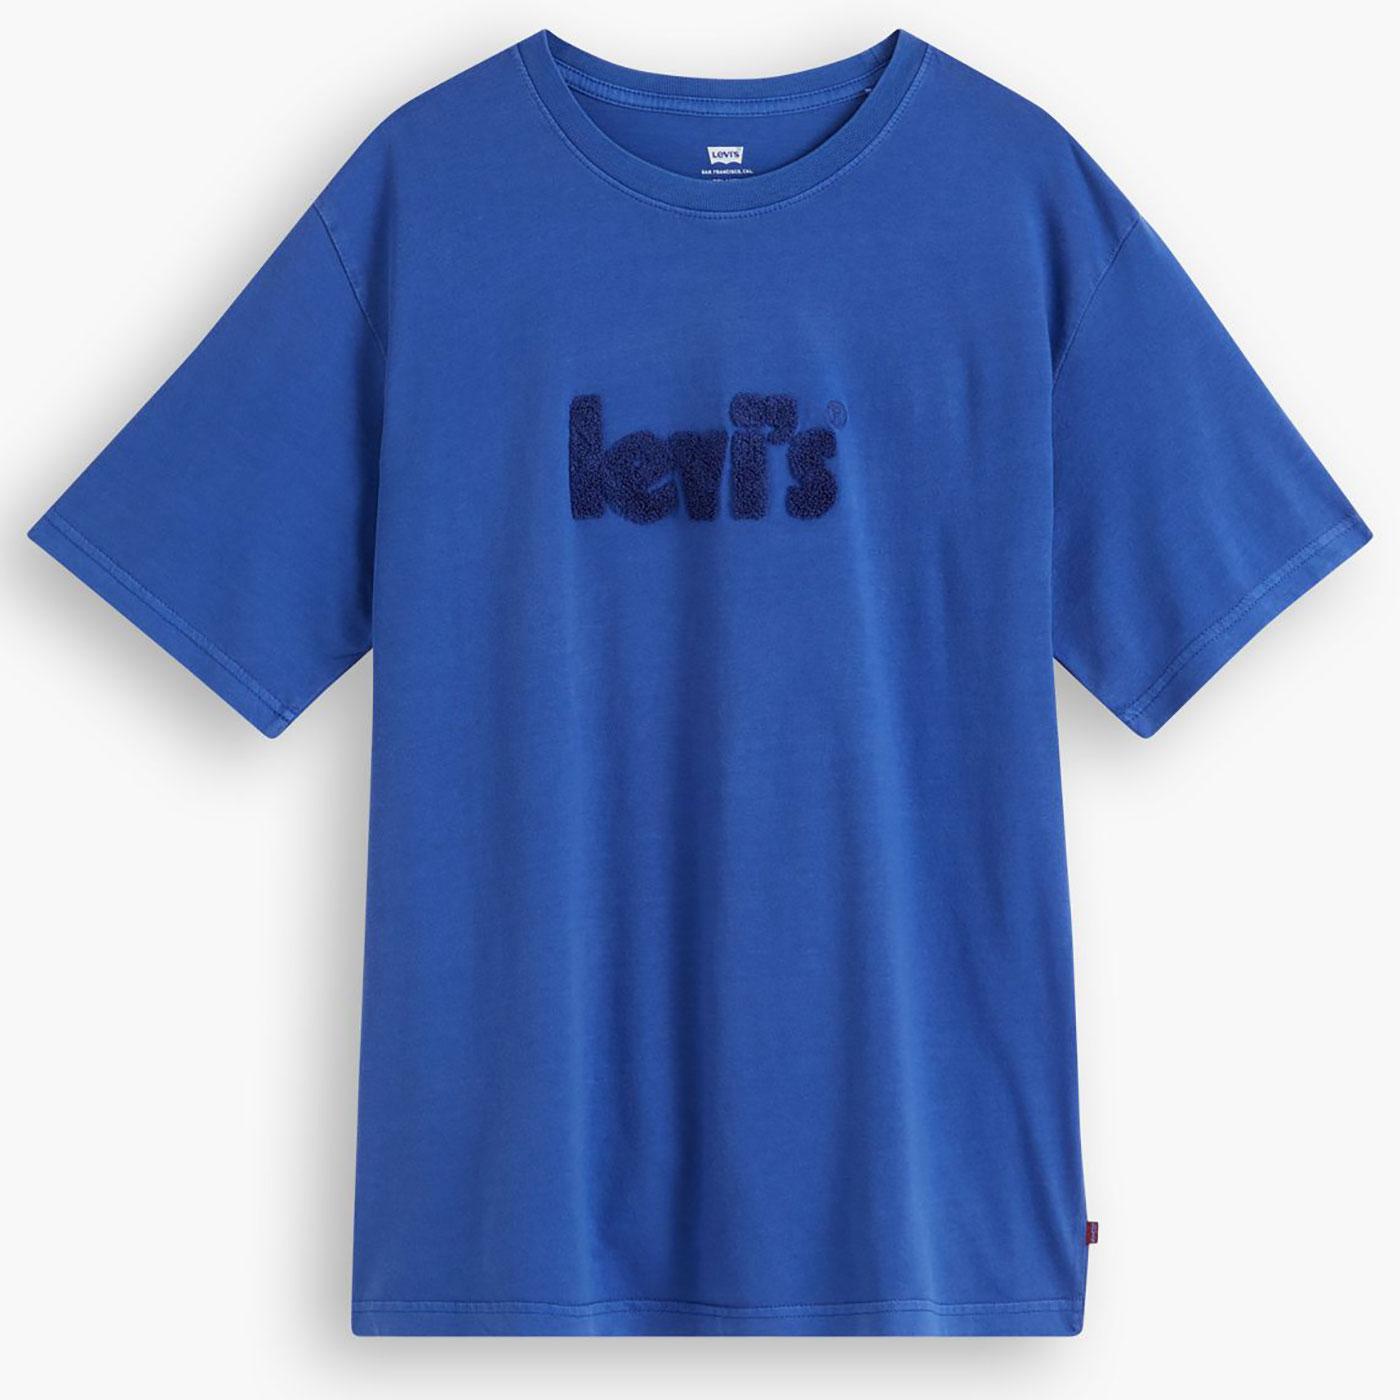 LEVI'S® Men's Retro Relaxed Fit Towelling Logo Tee